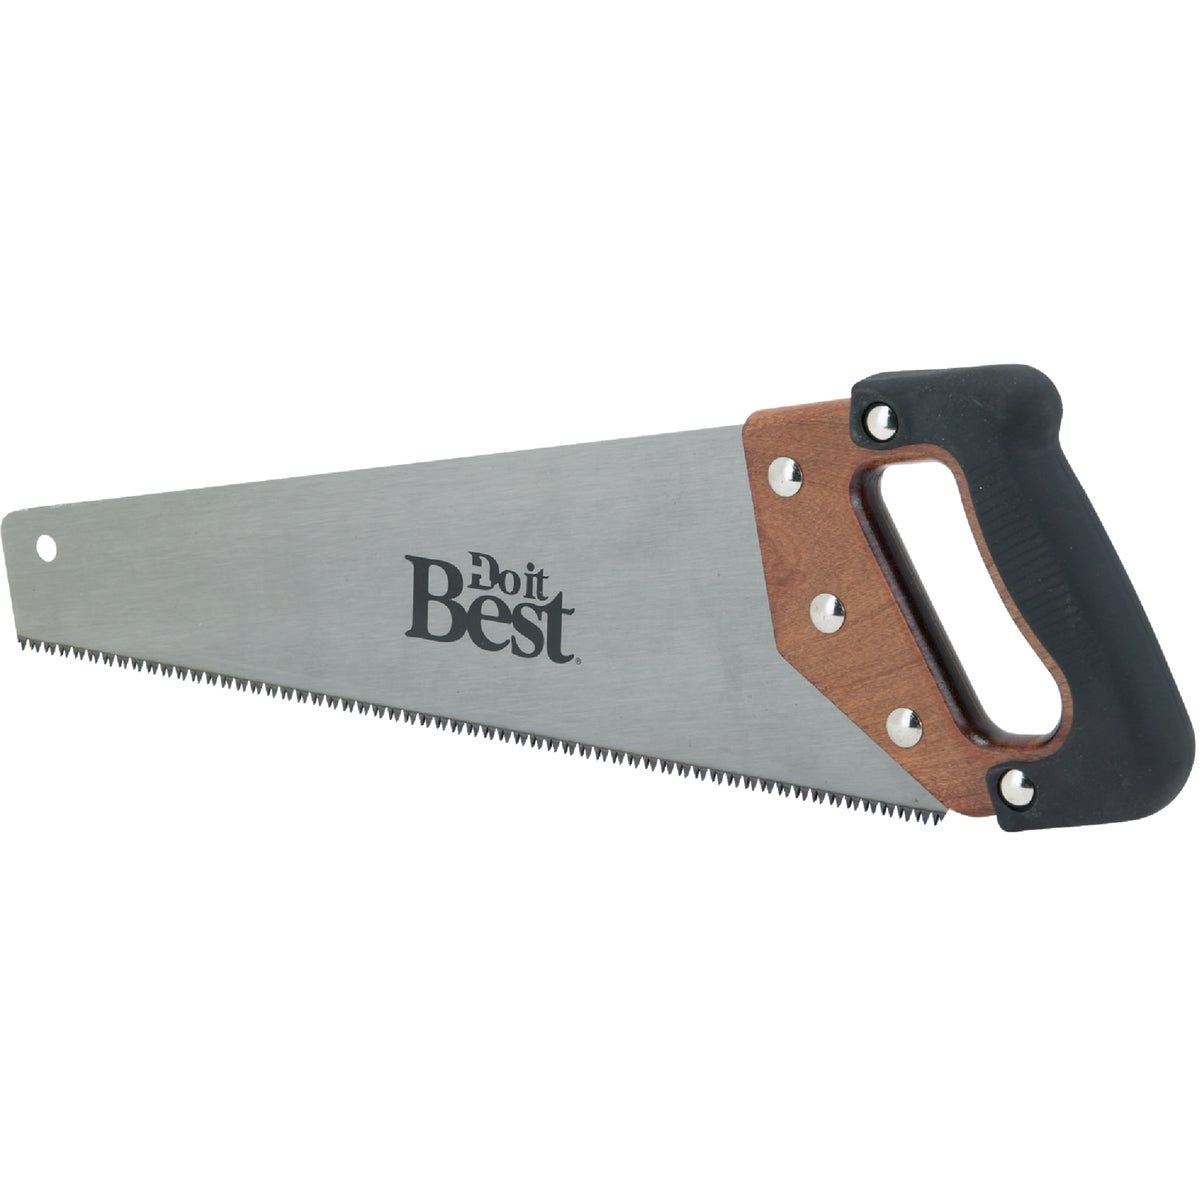 Do it Best 15 In. L. Blade 9 PPI Wood, Rubberized Grip Handle Hand Saw